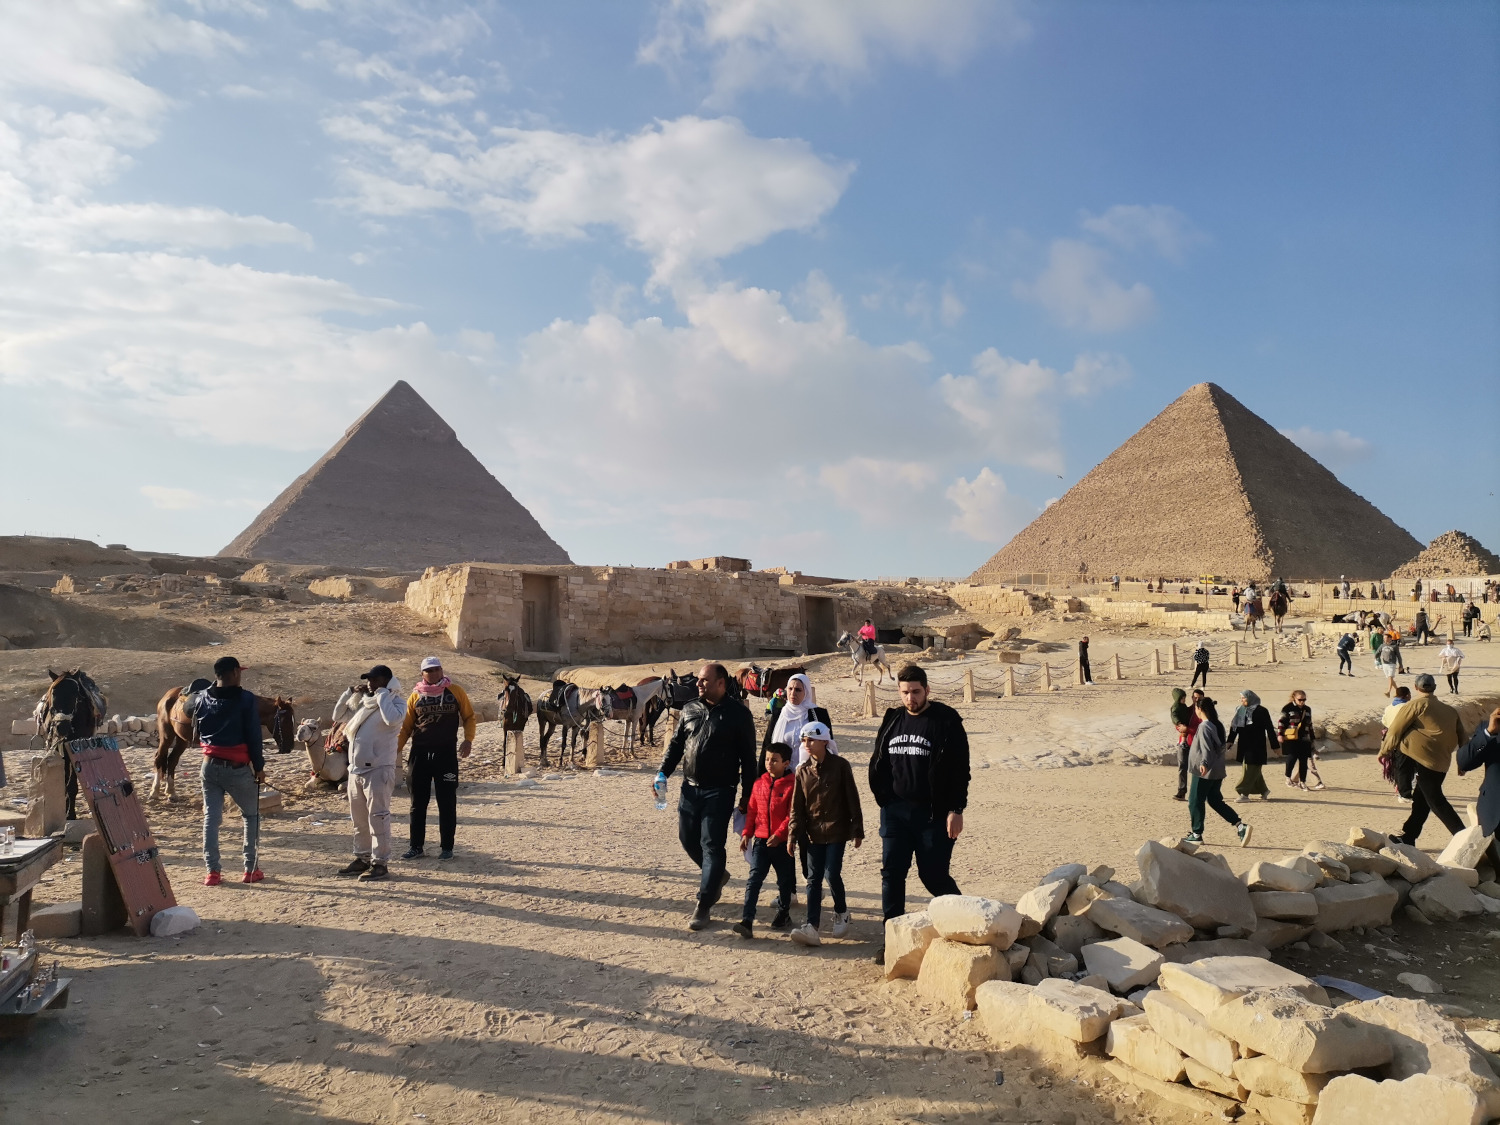 
The Pyramids tours and excursions from Sharm el Sheikh